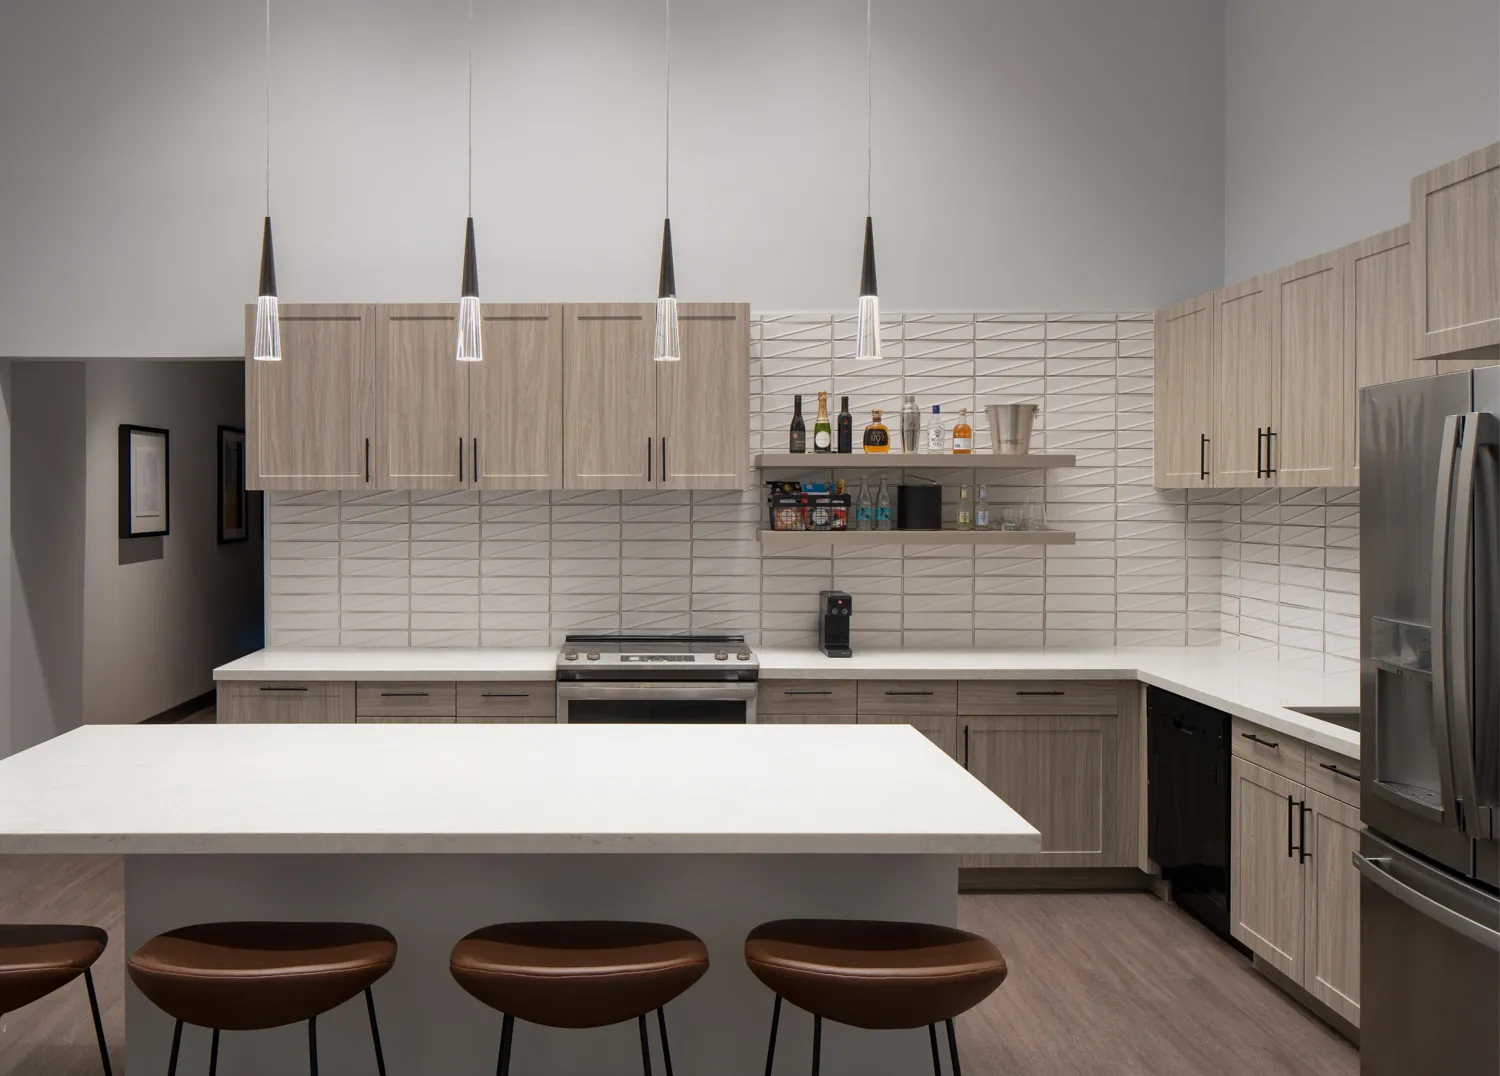 A kitchen with a white island and brown stools